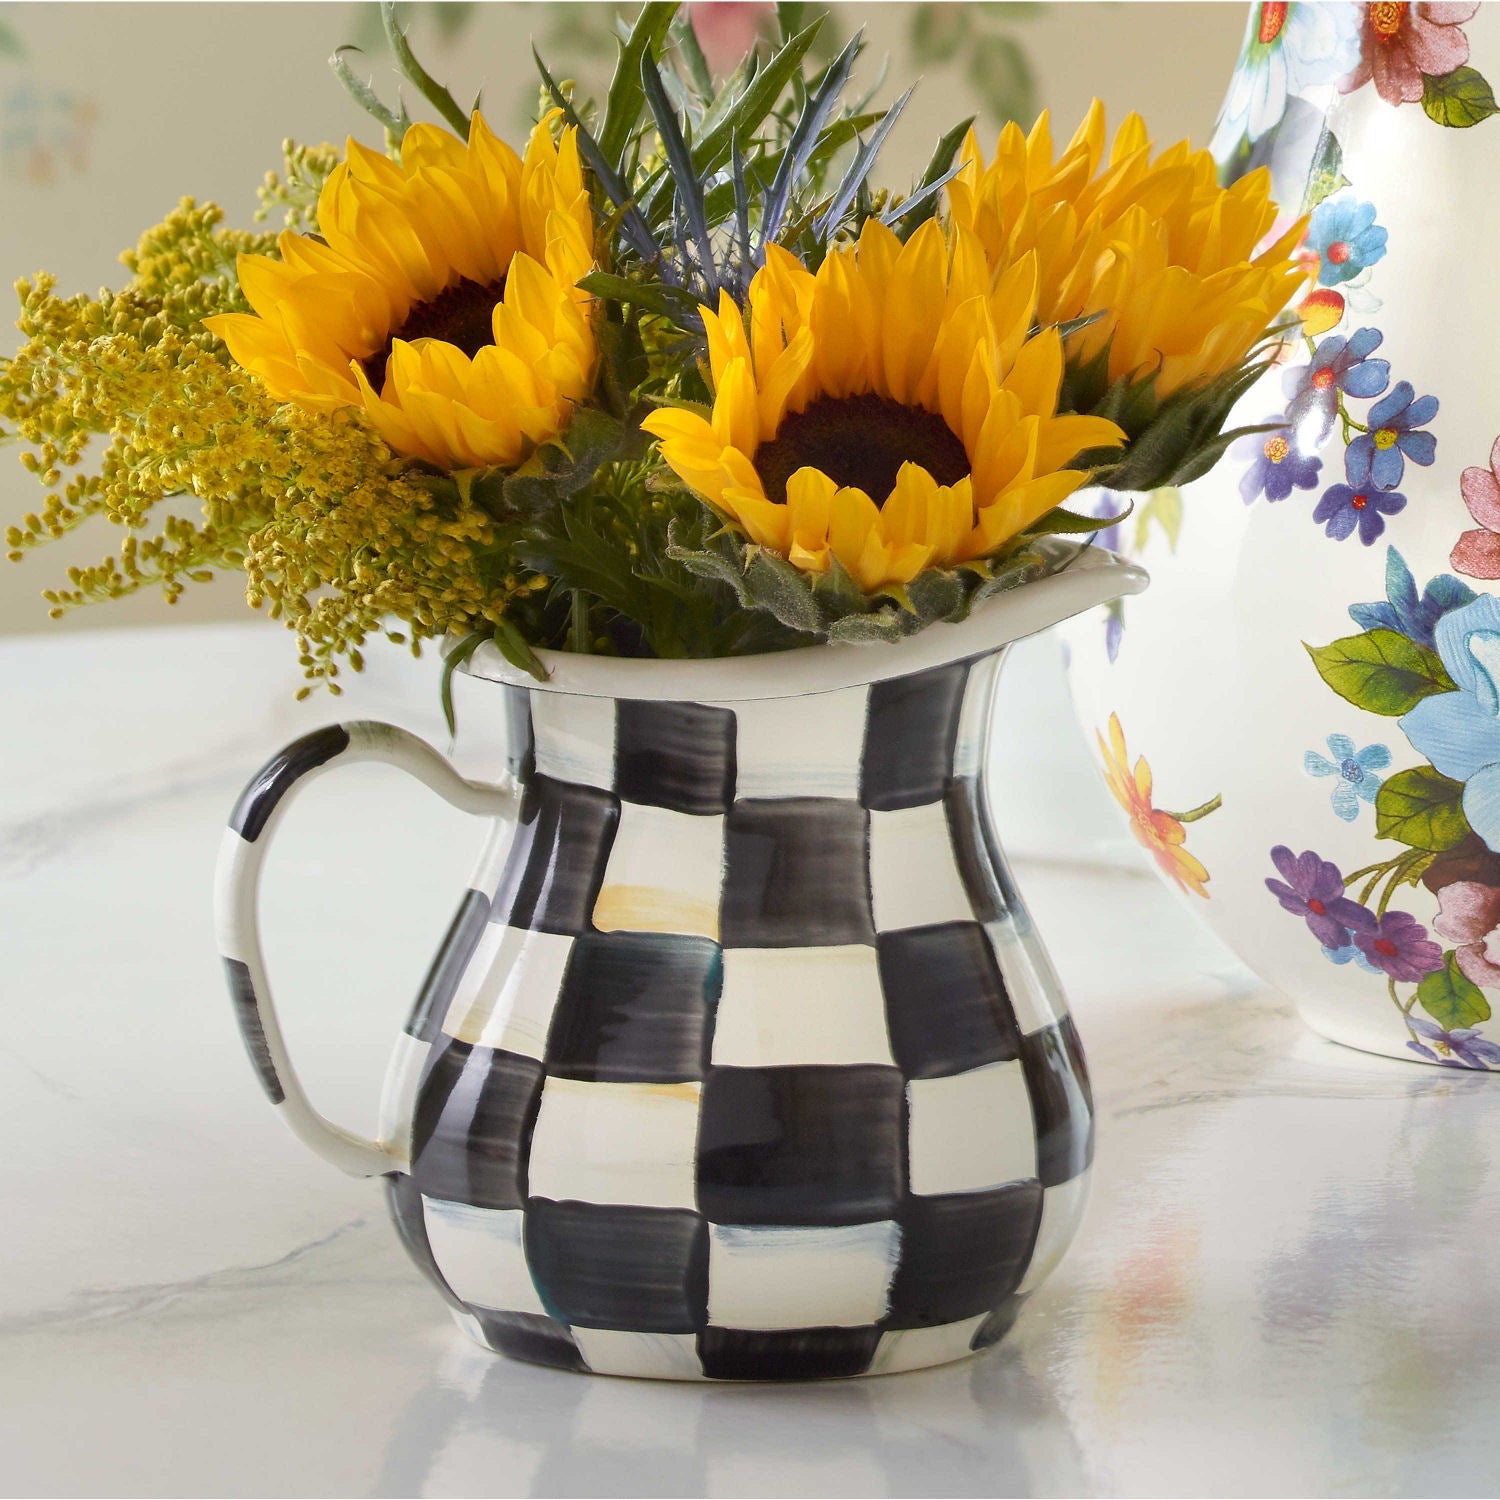 MacKenzie - Childs Courtly Check Creamer - |VESIMI Design| Luxury Bathrooms and Home Decor